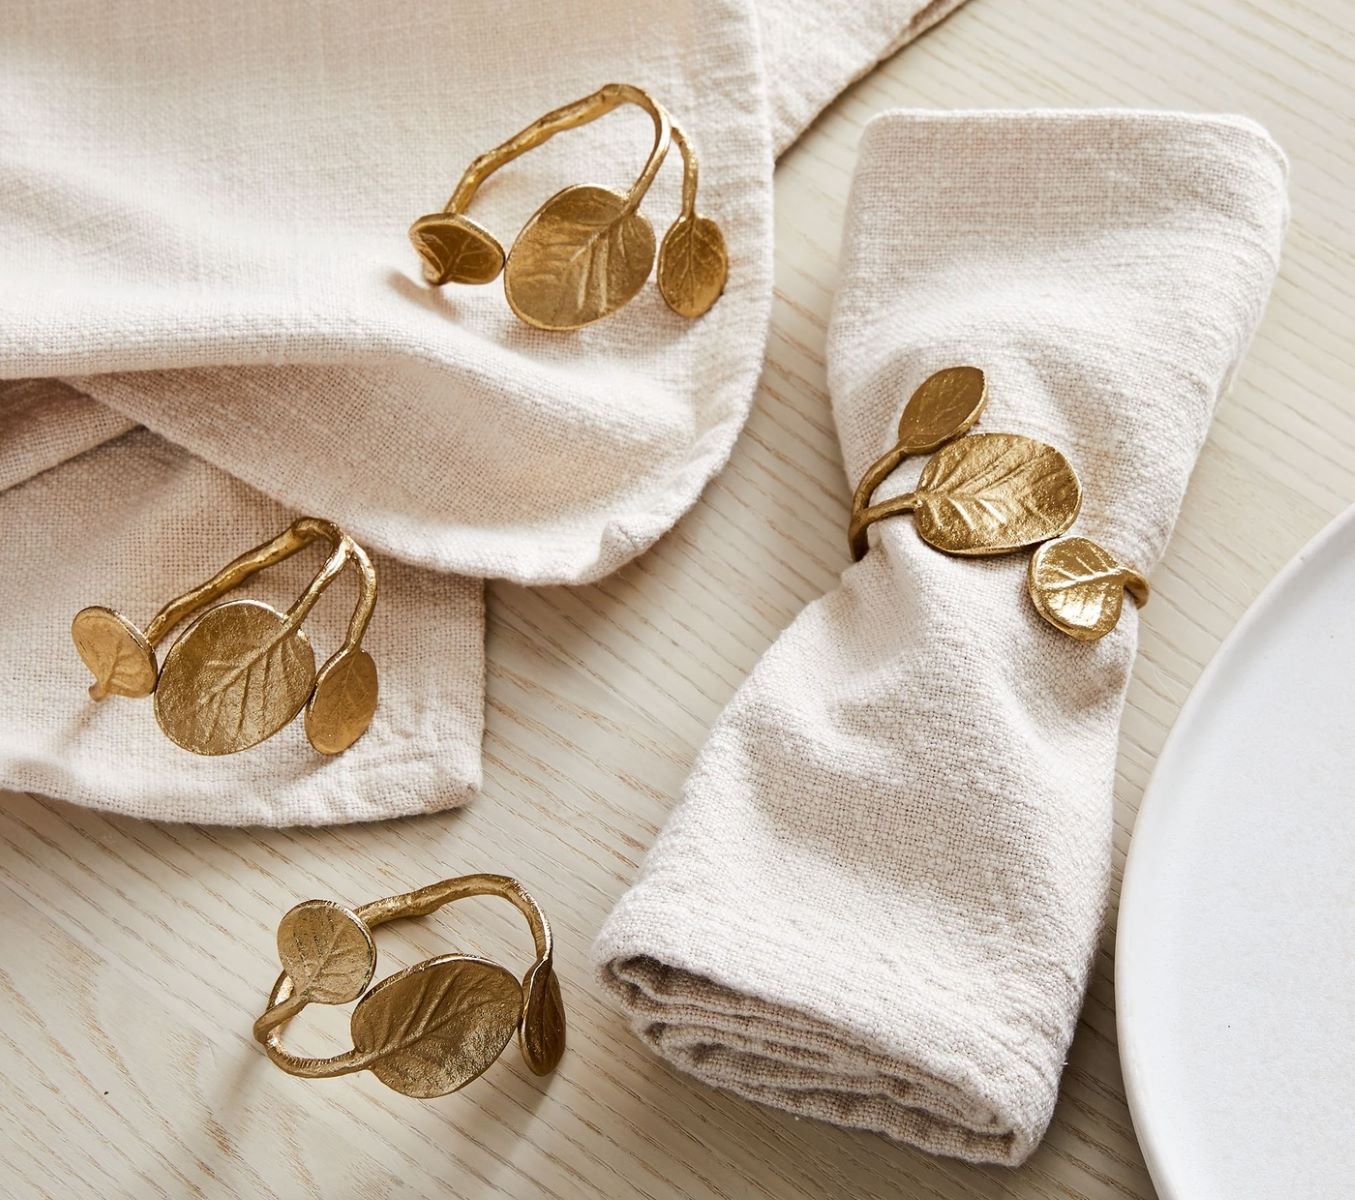 What Is The Point Of Napkin Rings?